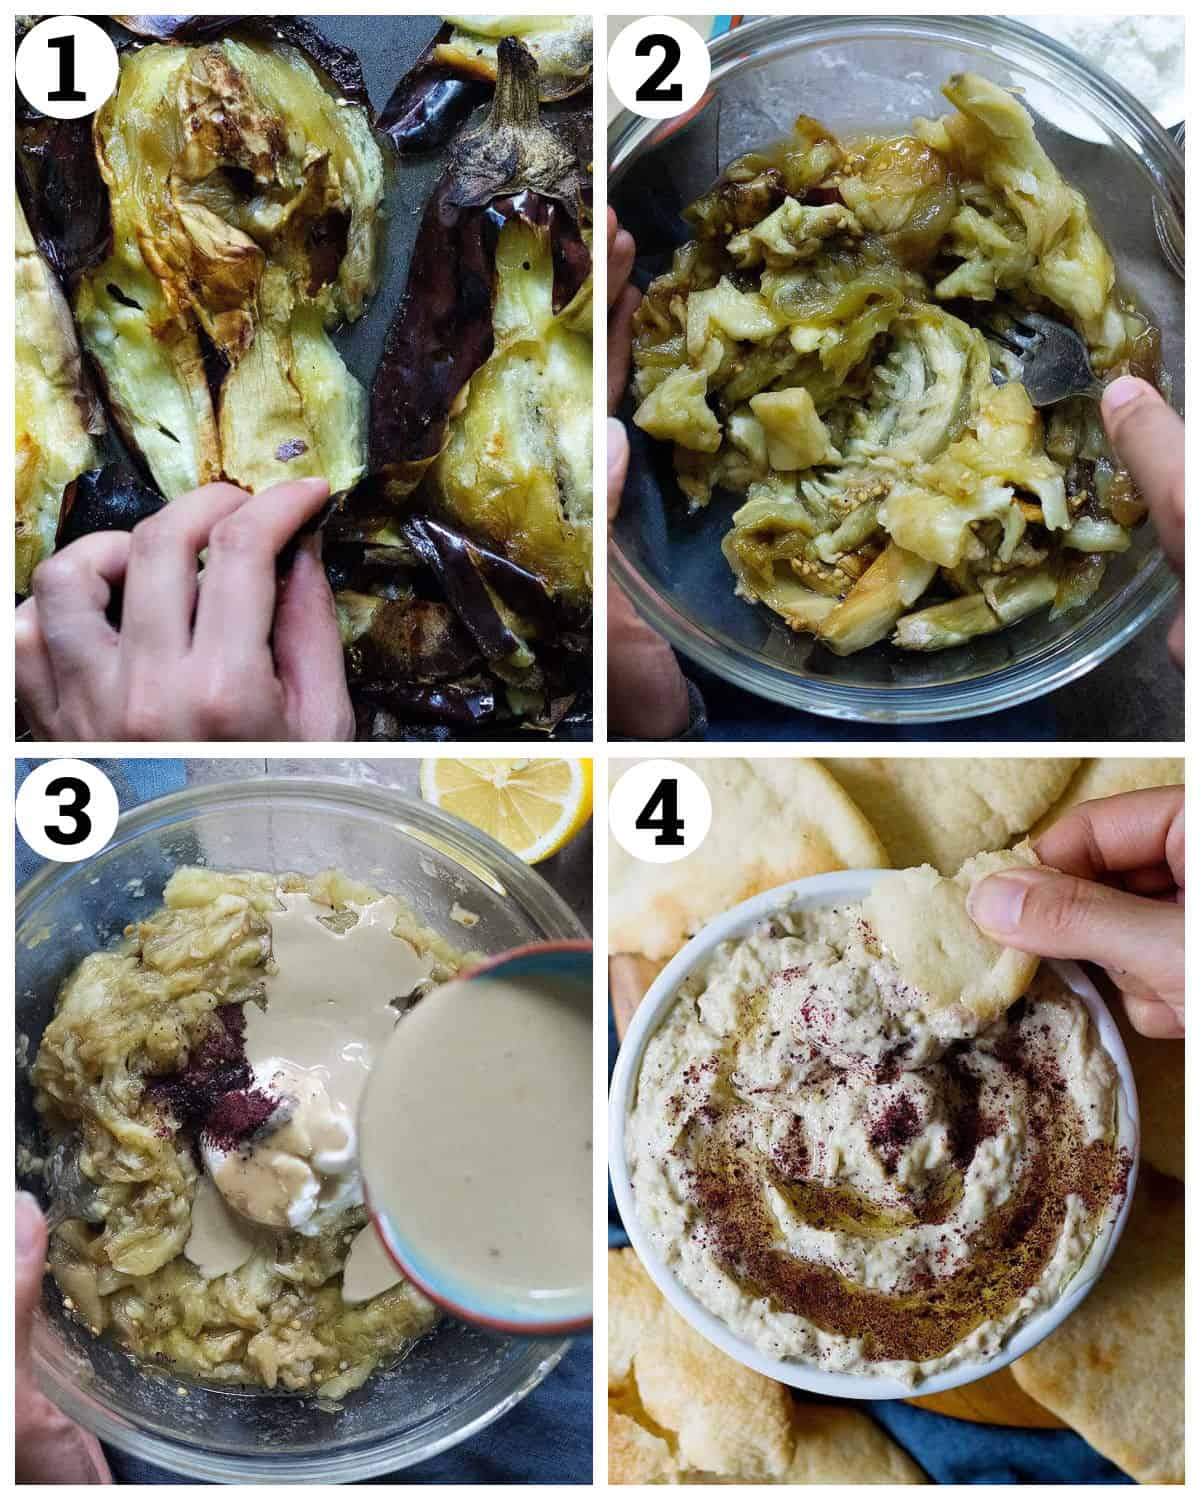 Char the eggplants over the flame. Then peel them, mash them, mix with tahini and sumac and top with olive oil. 